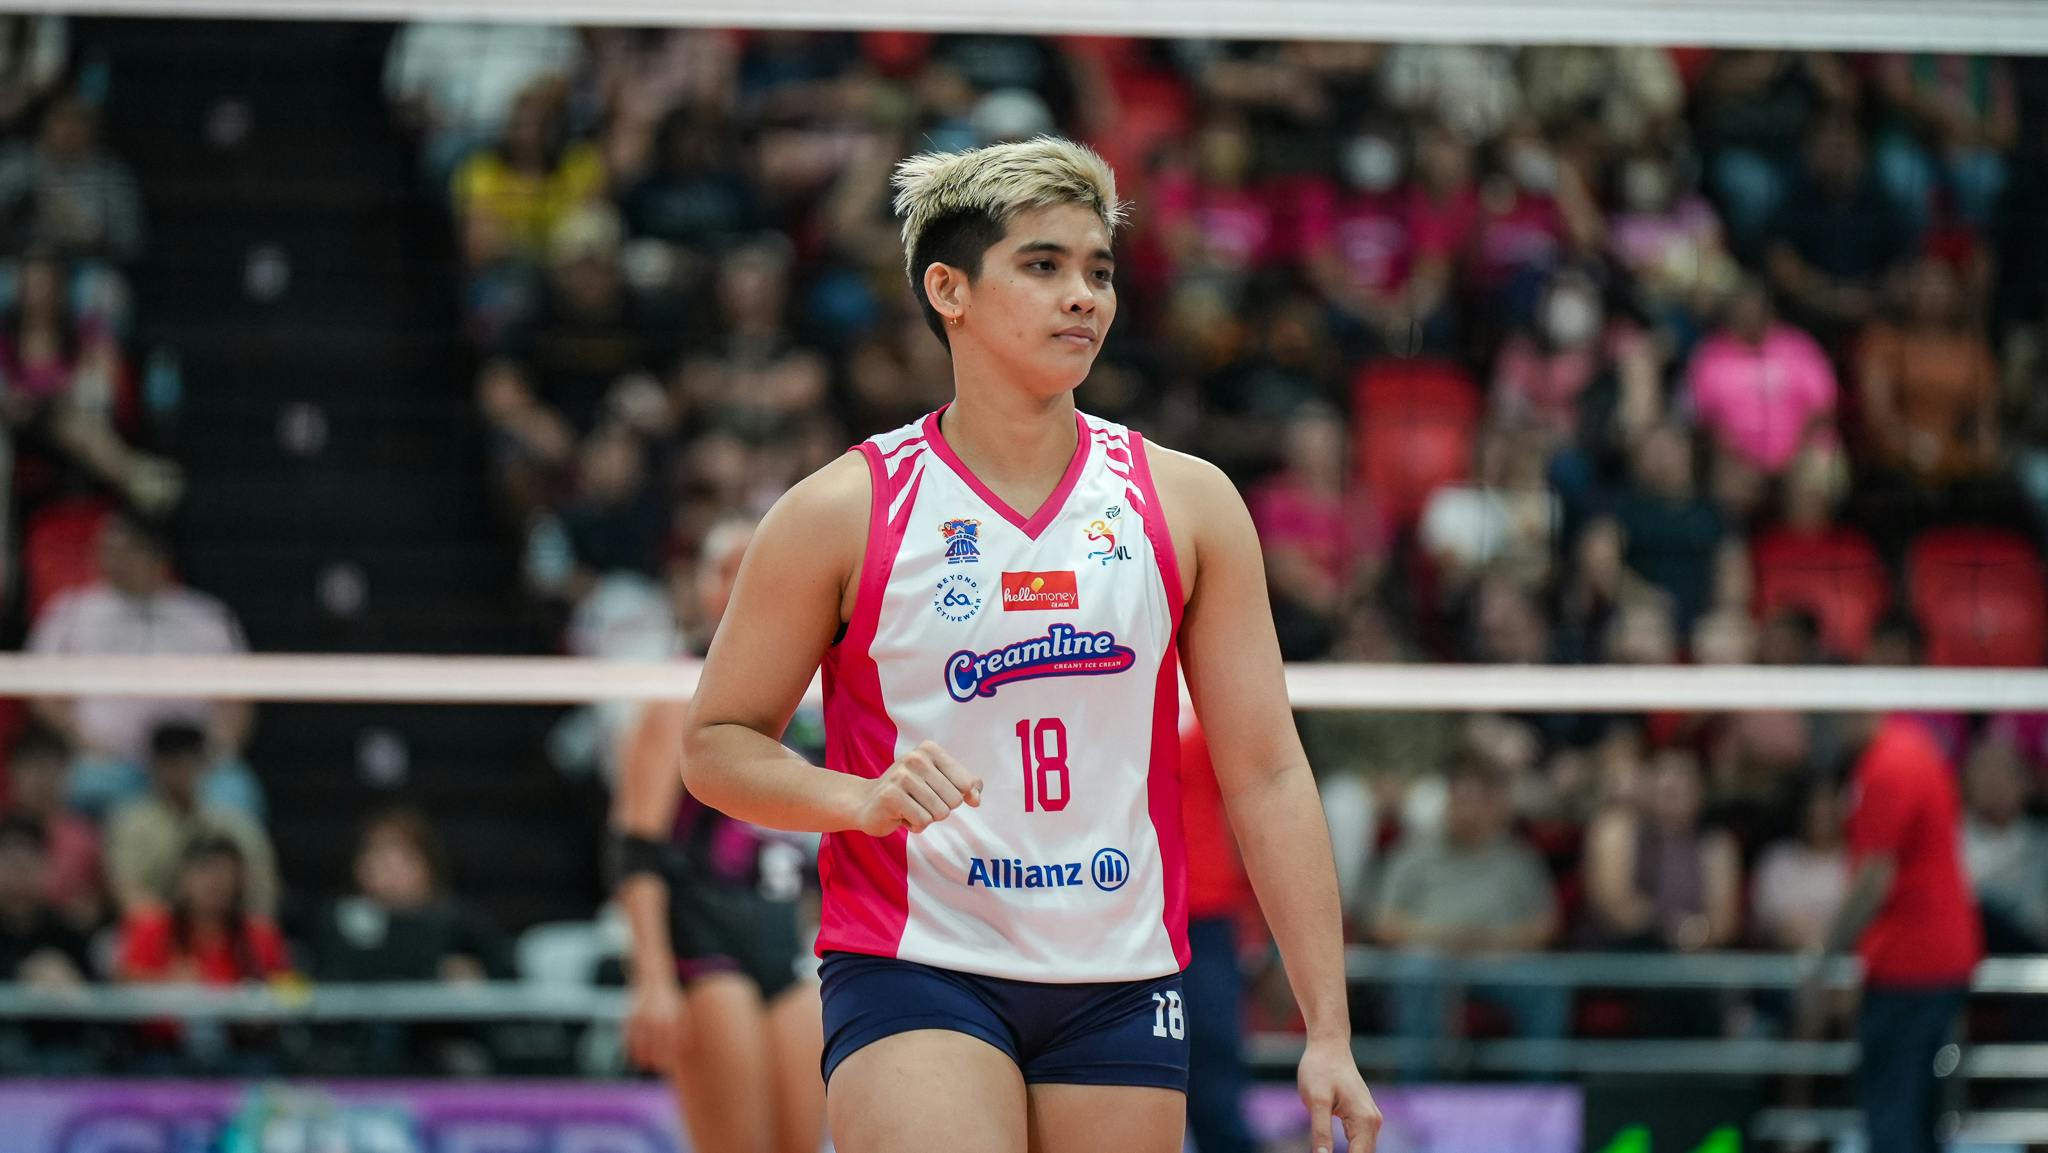 PVL: Tots Carlos downplays career-high performance, deflects credit to Creamline